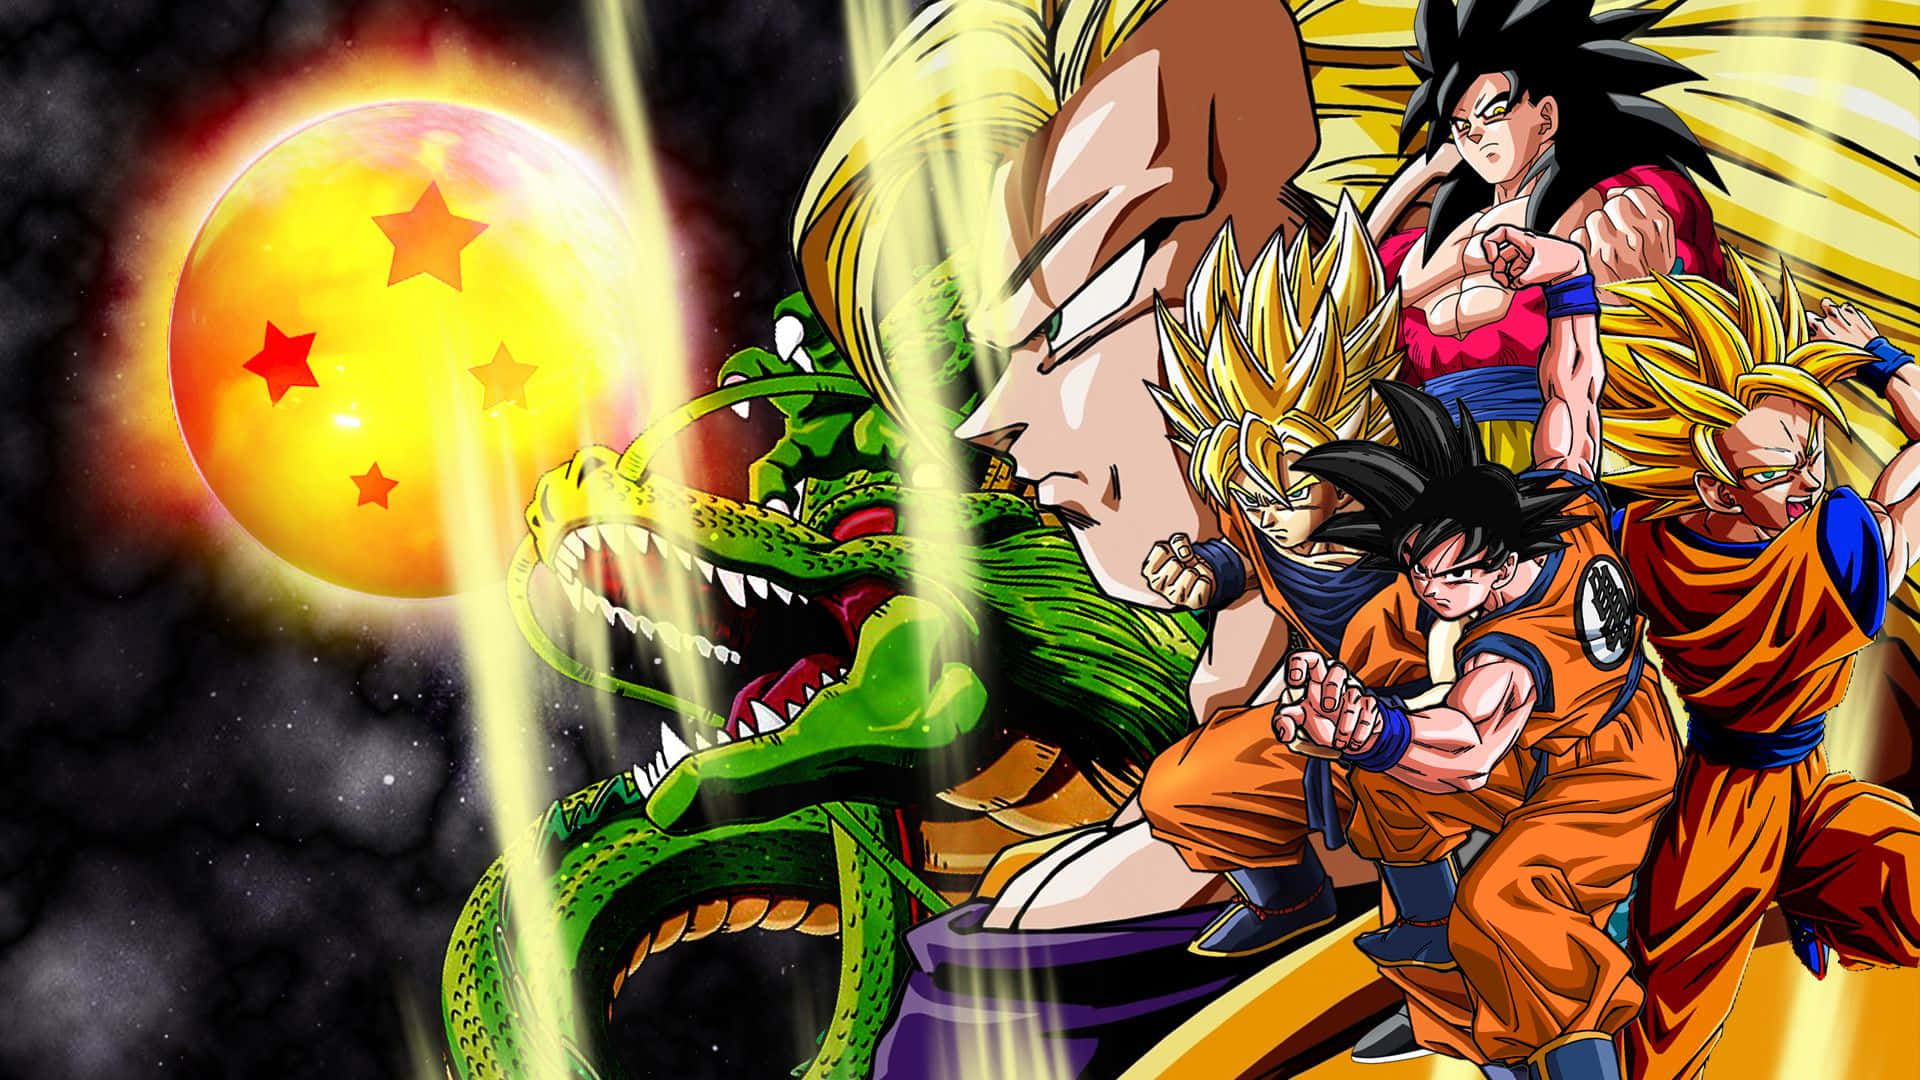 Dark Iconic Dragonball Z Pictures